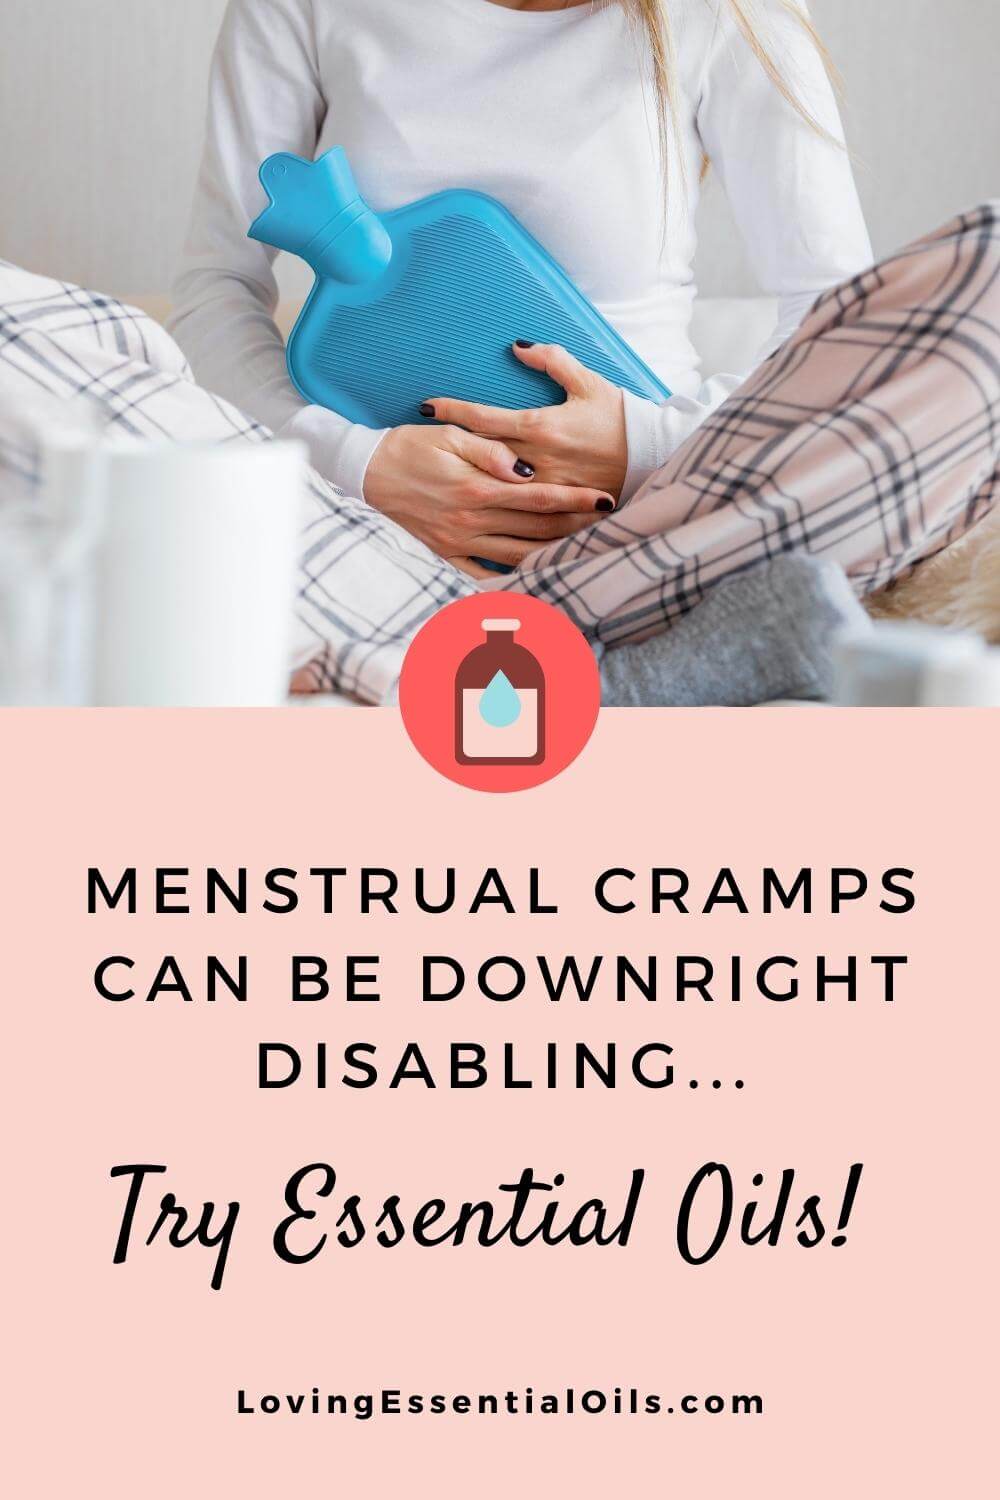 Menstrual cramps can be downright disabling...try Essential Oils! Learn all about essential oils for period pain and cramps by Loving Essential Oils